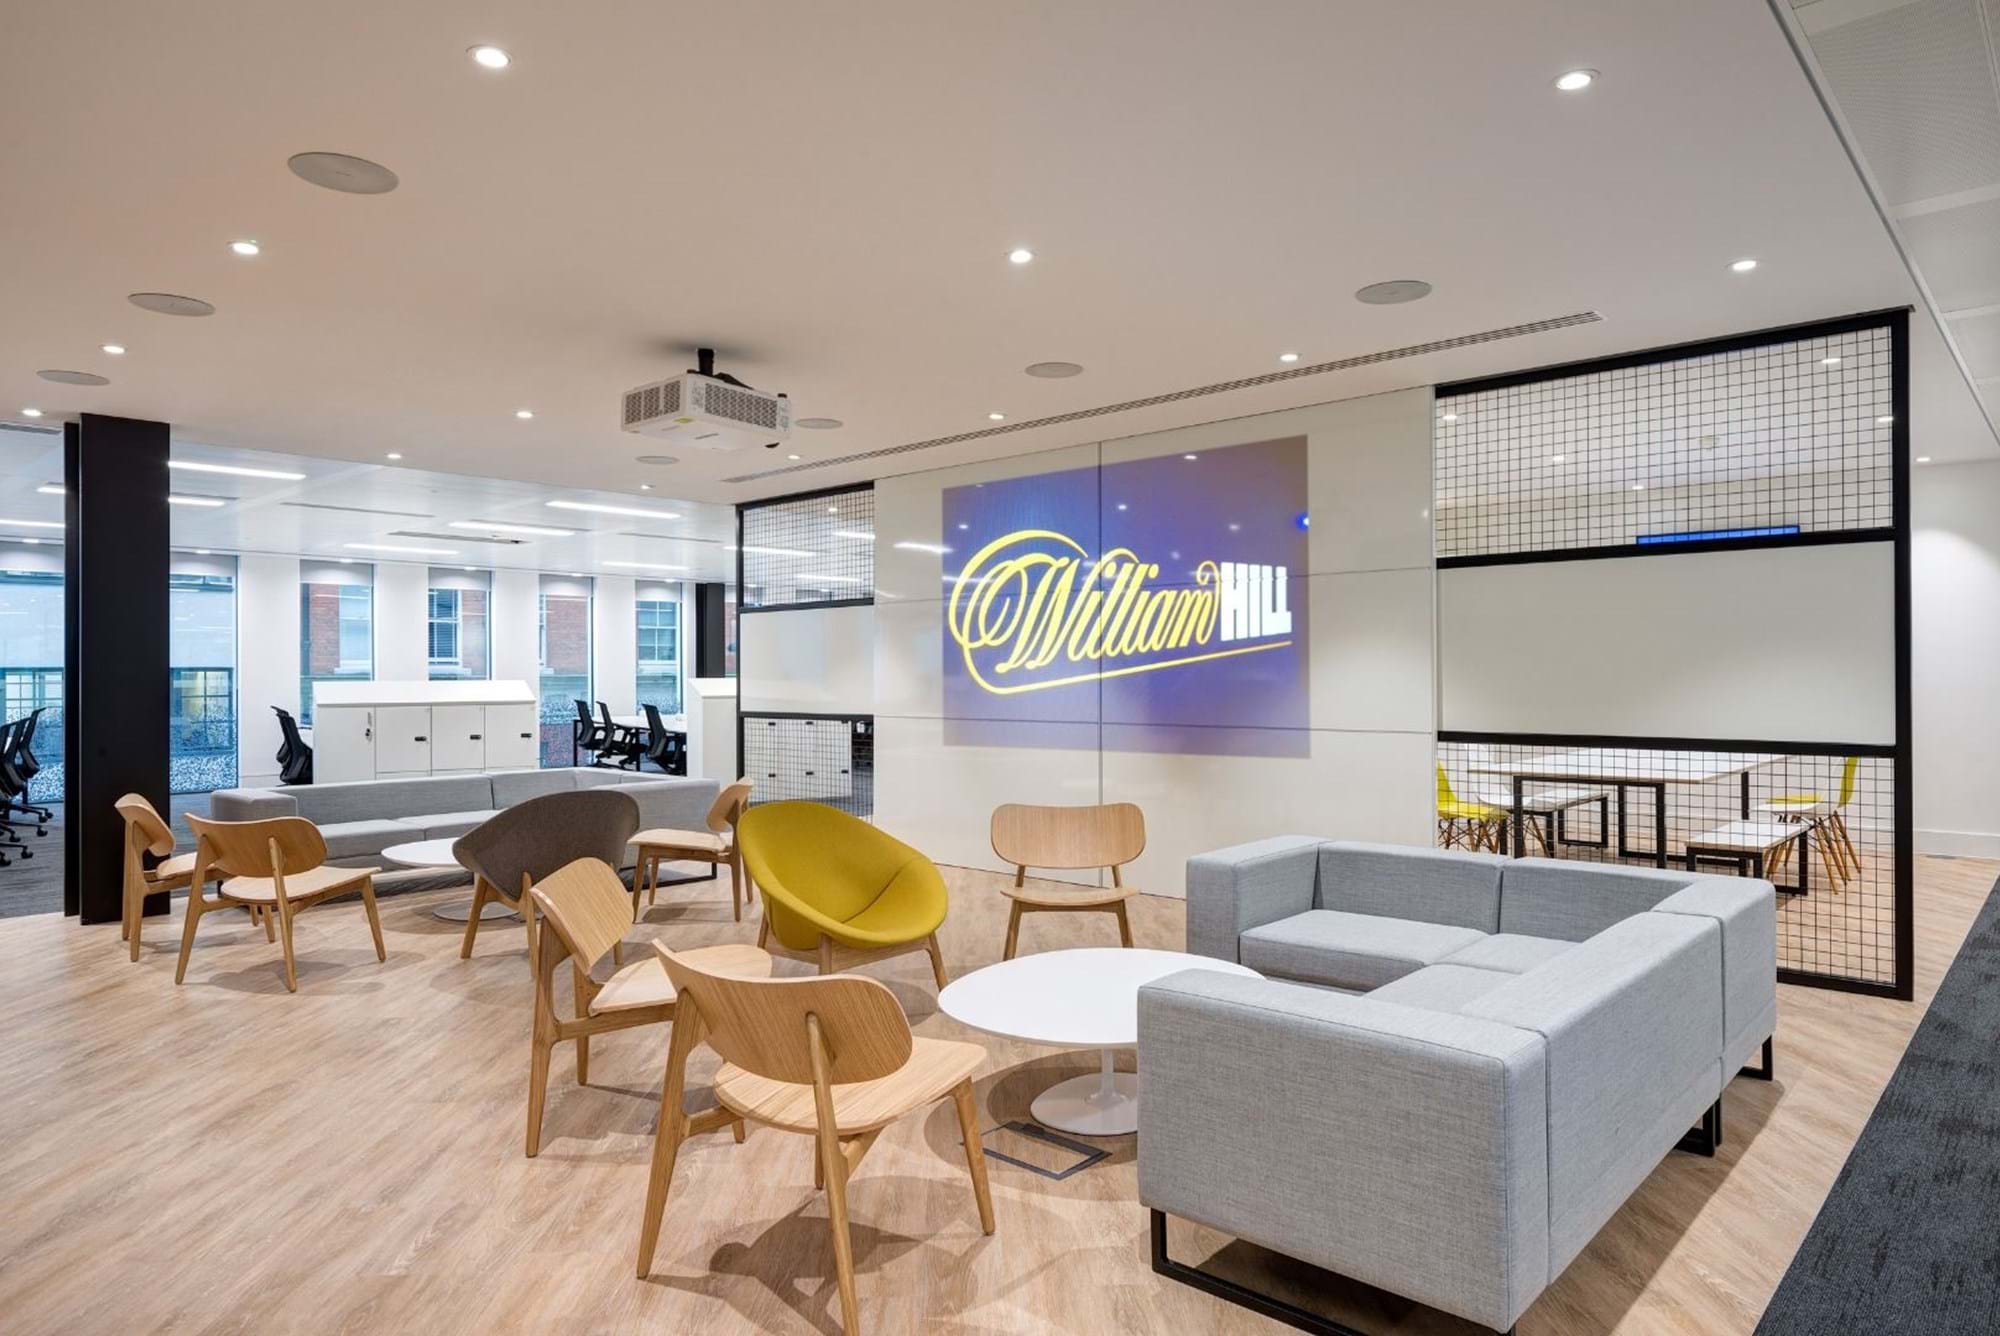 Modus Workspace office design, fit out and refurbishment - William Hill - William Hill 09 B highres sRGB.jpg